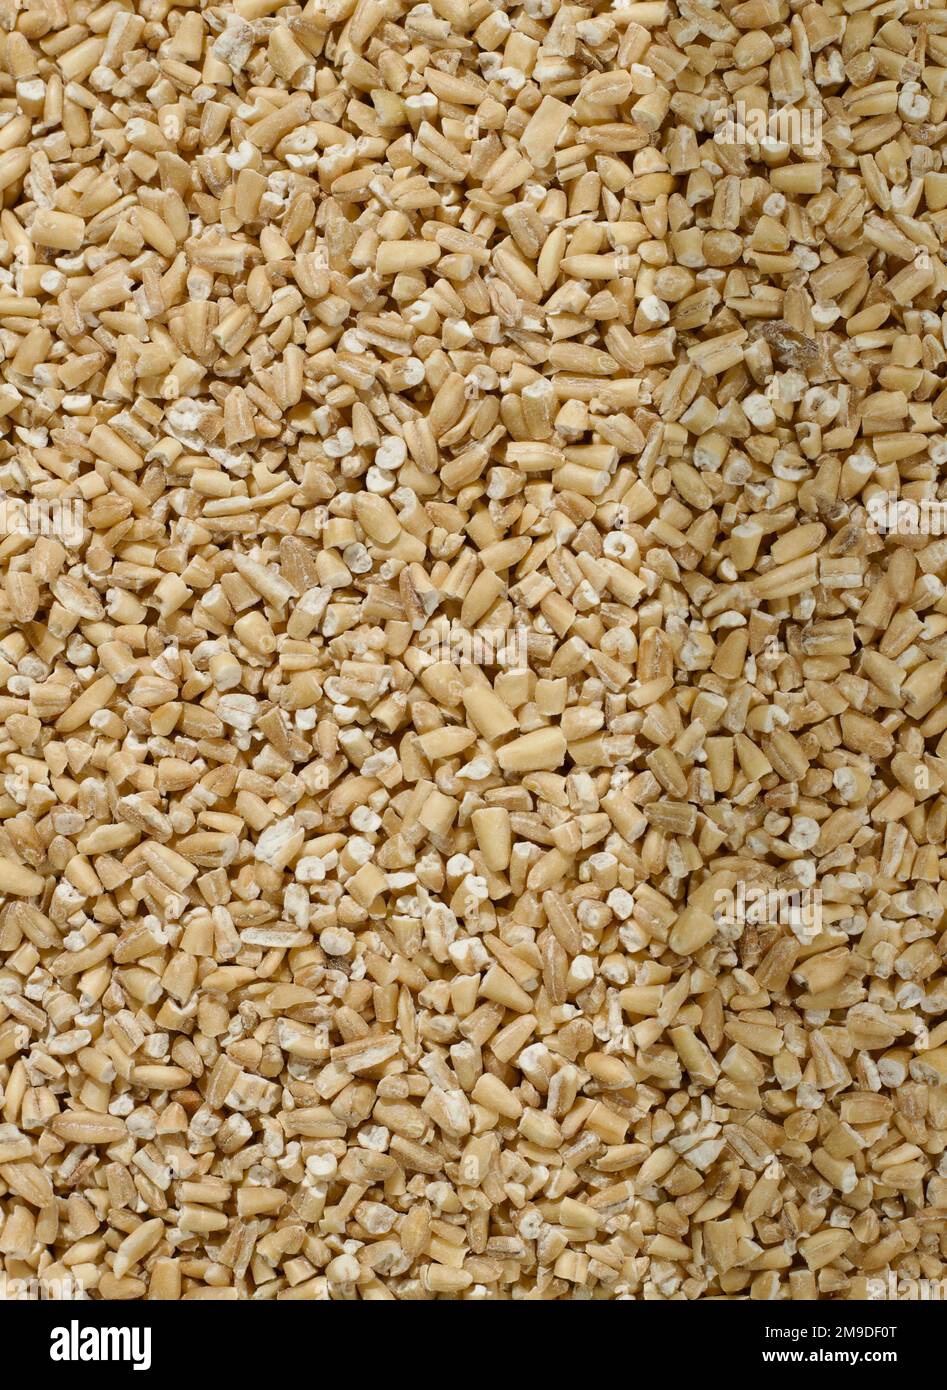 Grains and Things-Steel cut oats, White rice and Spiral Pasta! Stock Photo